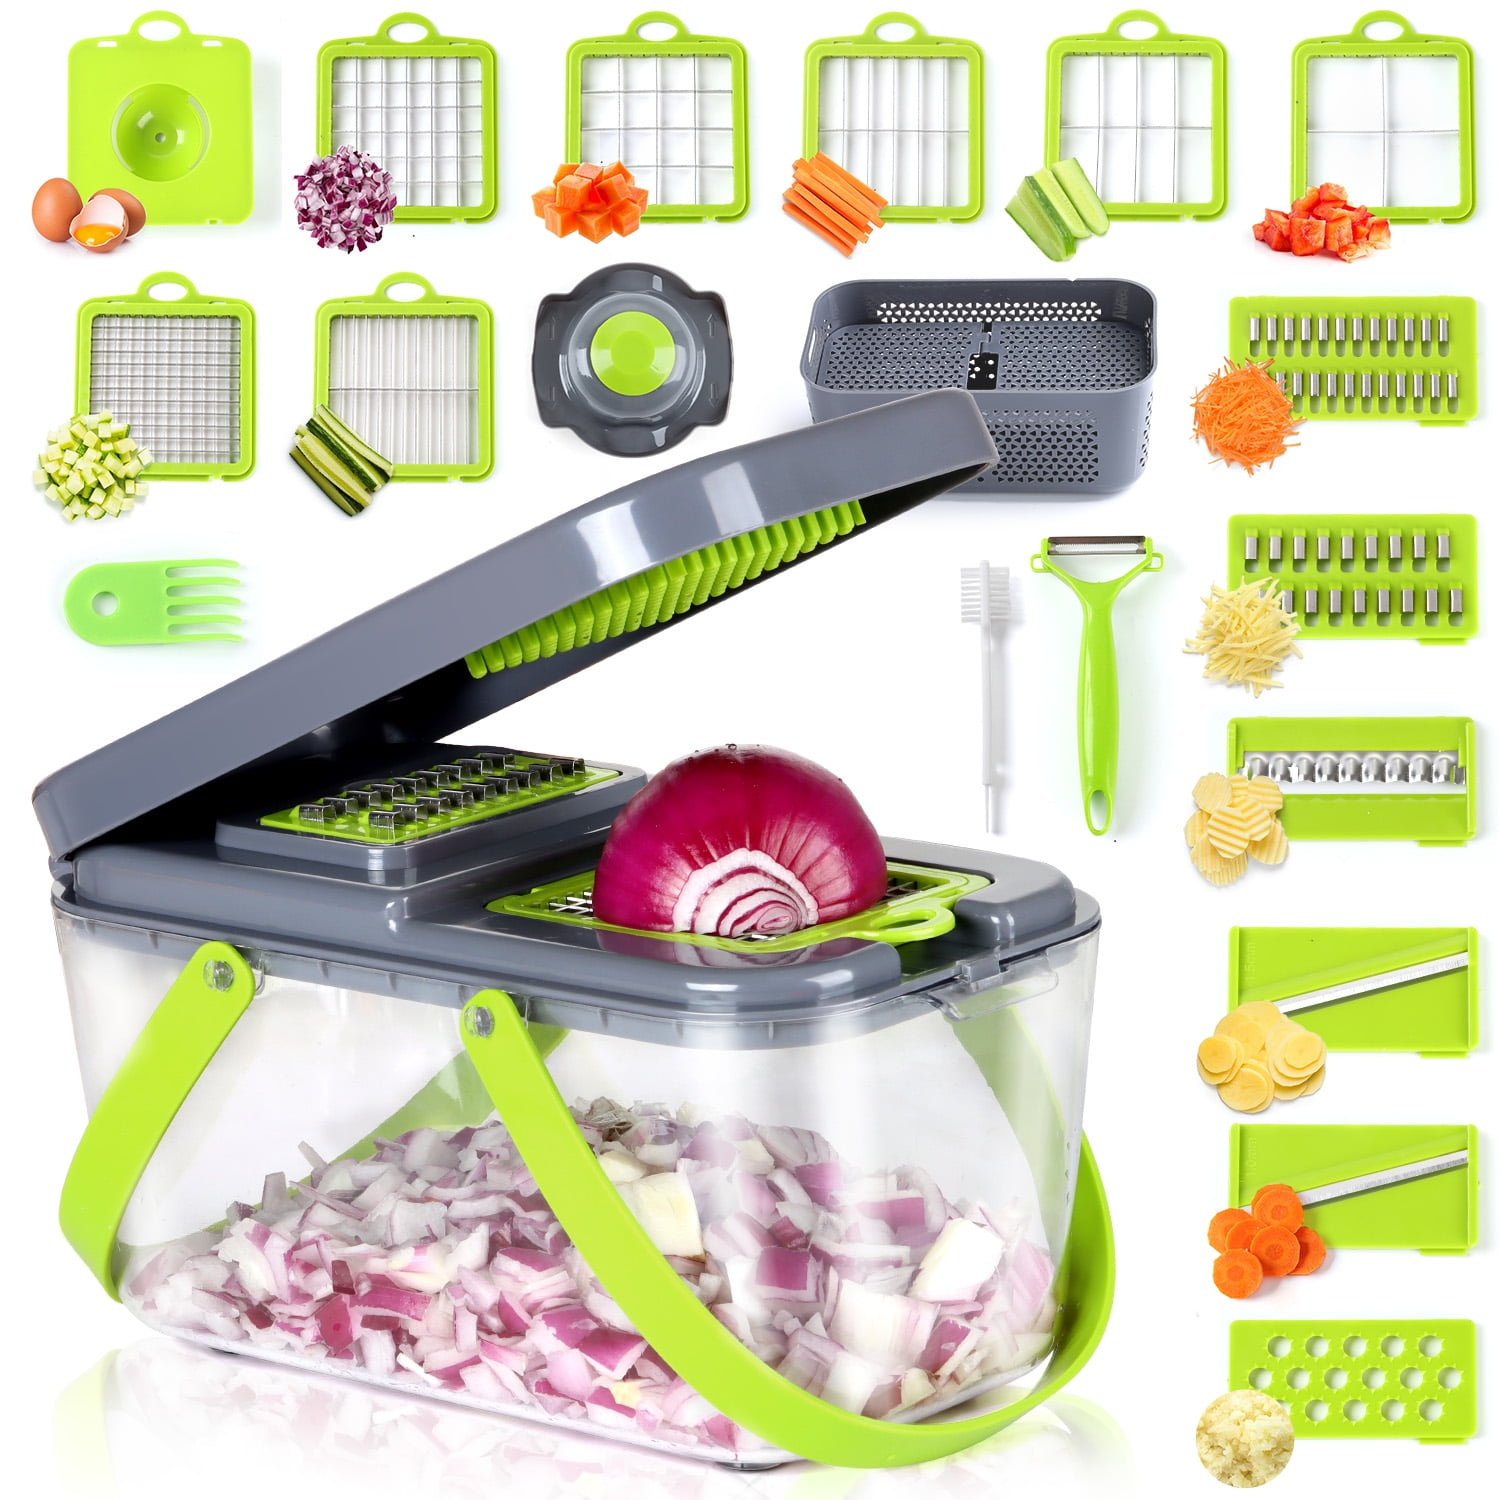 Vesteel 22 in 1 Vegetable Chopper, Multifunctional Onion Chopper Food  Cutter Dicer Mandolin Slicer with Container and Colander Drain Basket - 13  Stainless Steel Blades 